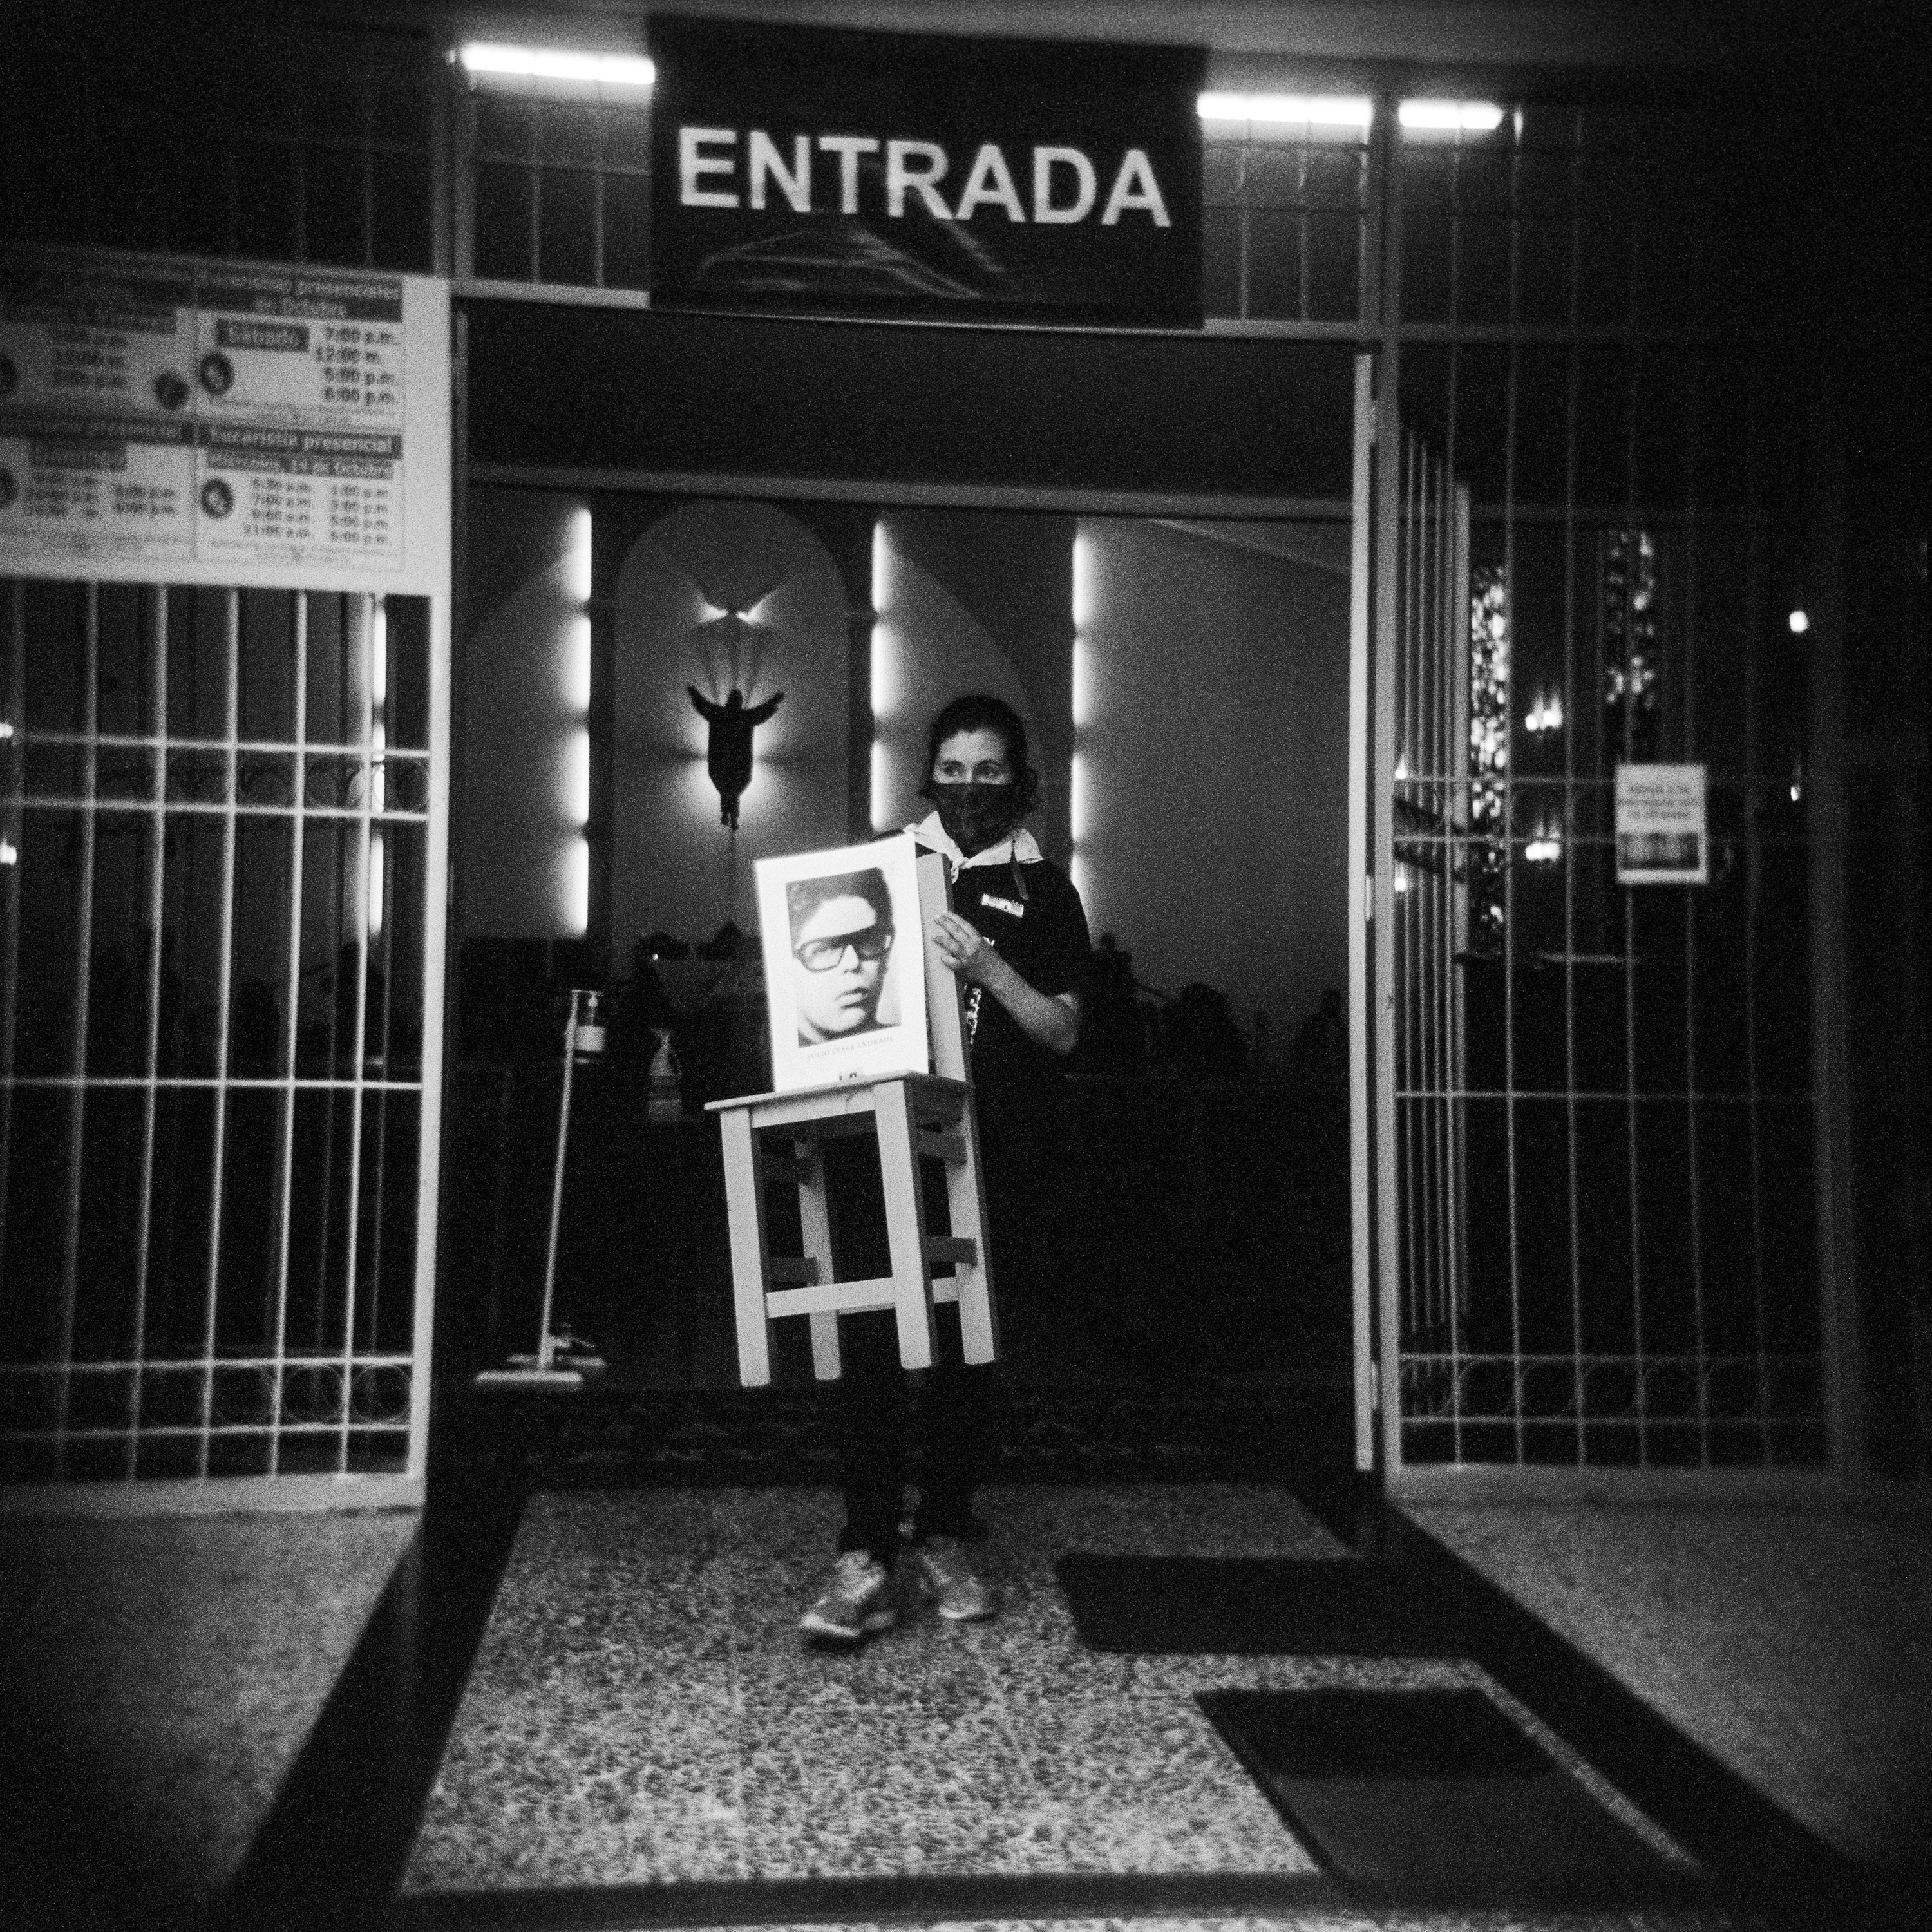 Elizabeth López Suspes, the niece of David Suspes Celis &ndash; a chef forcibly disappeared in 1985, during the siege of the Palace of Justice in Bogotá &nbsp;&ndash; leaves the San Gerardo Mayela Parish in Bogotá, after a mass given in memory of the disappeared. She carries a chair depicting Julio César Andrade, an auxiliary magistrate of the Supreme Court, who also disappeared during the siege. The Palace of Justice siege was one of the deadliest events of Colombia&rsquo;s internal conflict. In November 1985, members of the 19th of April Movement (M-19) took over the Palace of Justice in Bogotá, taking hundreds of people hostage, including all 25 of the Supreme Court justices. Security forces stormed and retook the palace, in an operation that left up to 100 people dead, including many justices. Eleven survivors were taken away by security forces and never seen again.